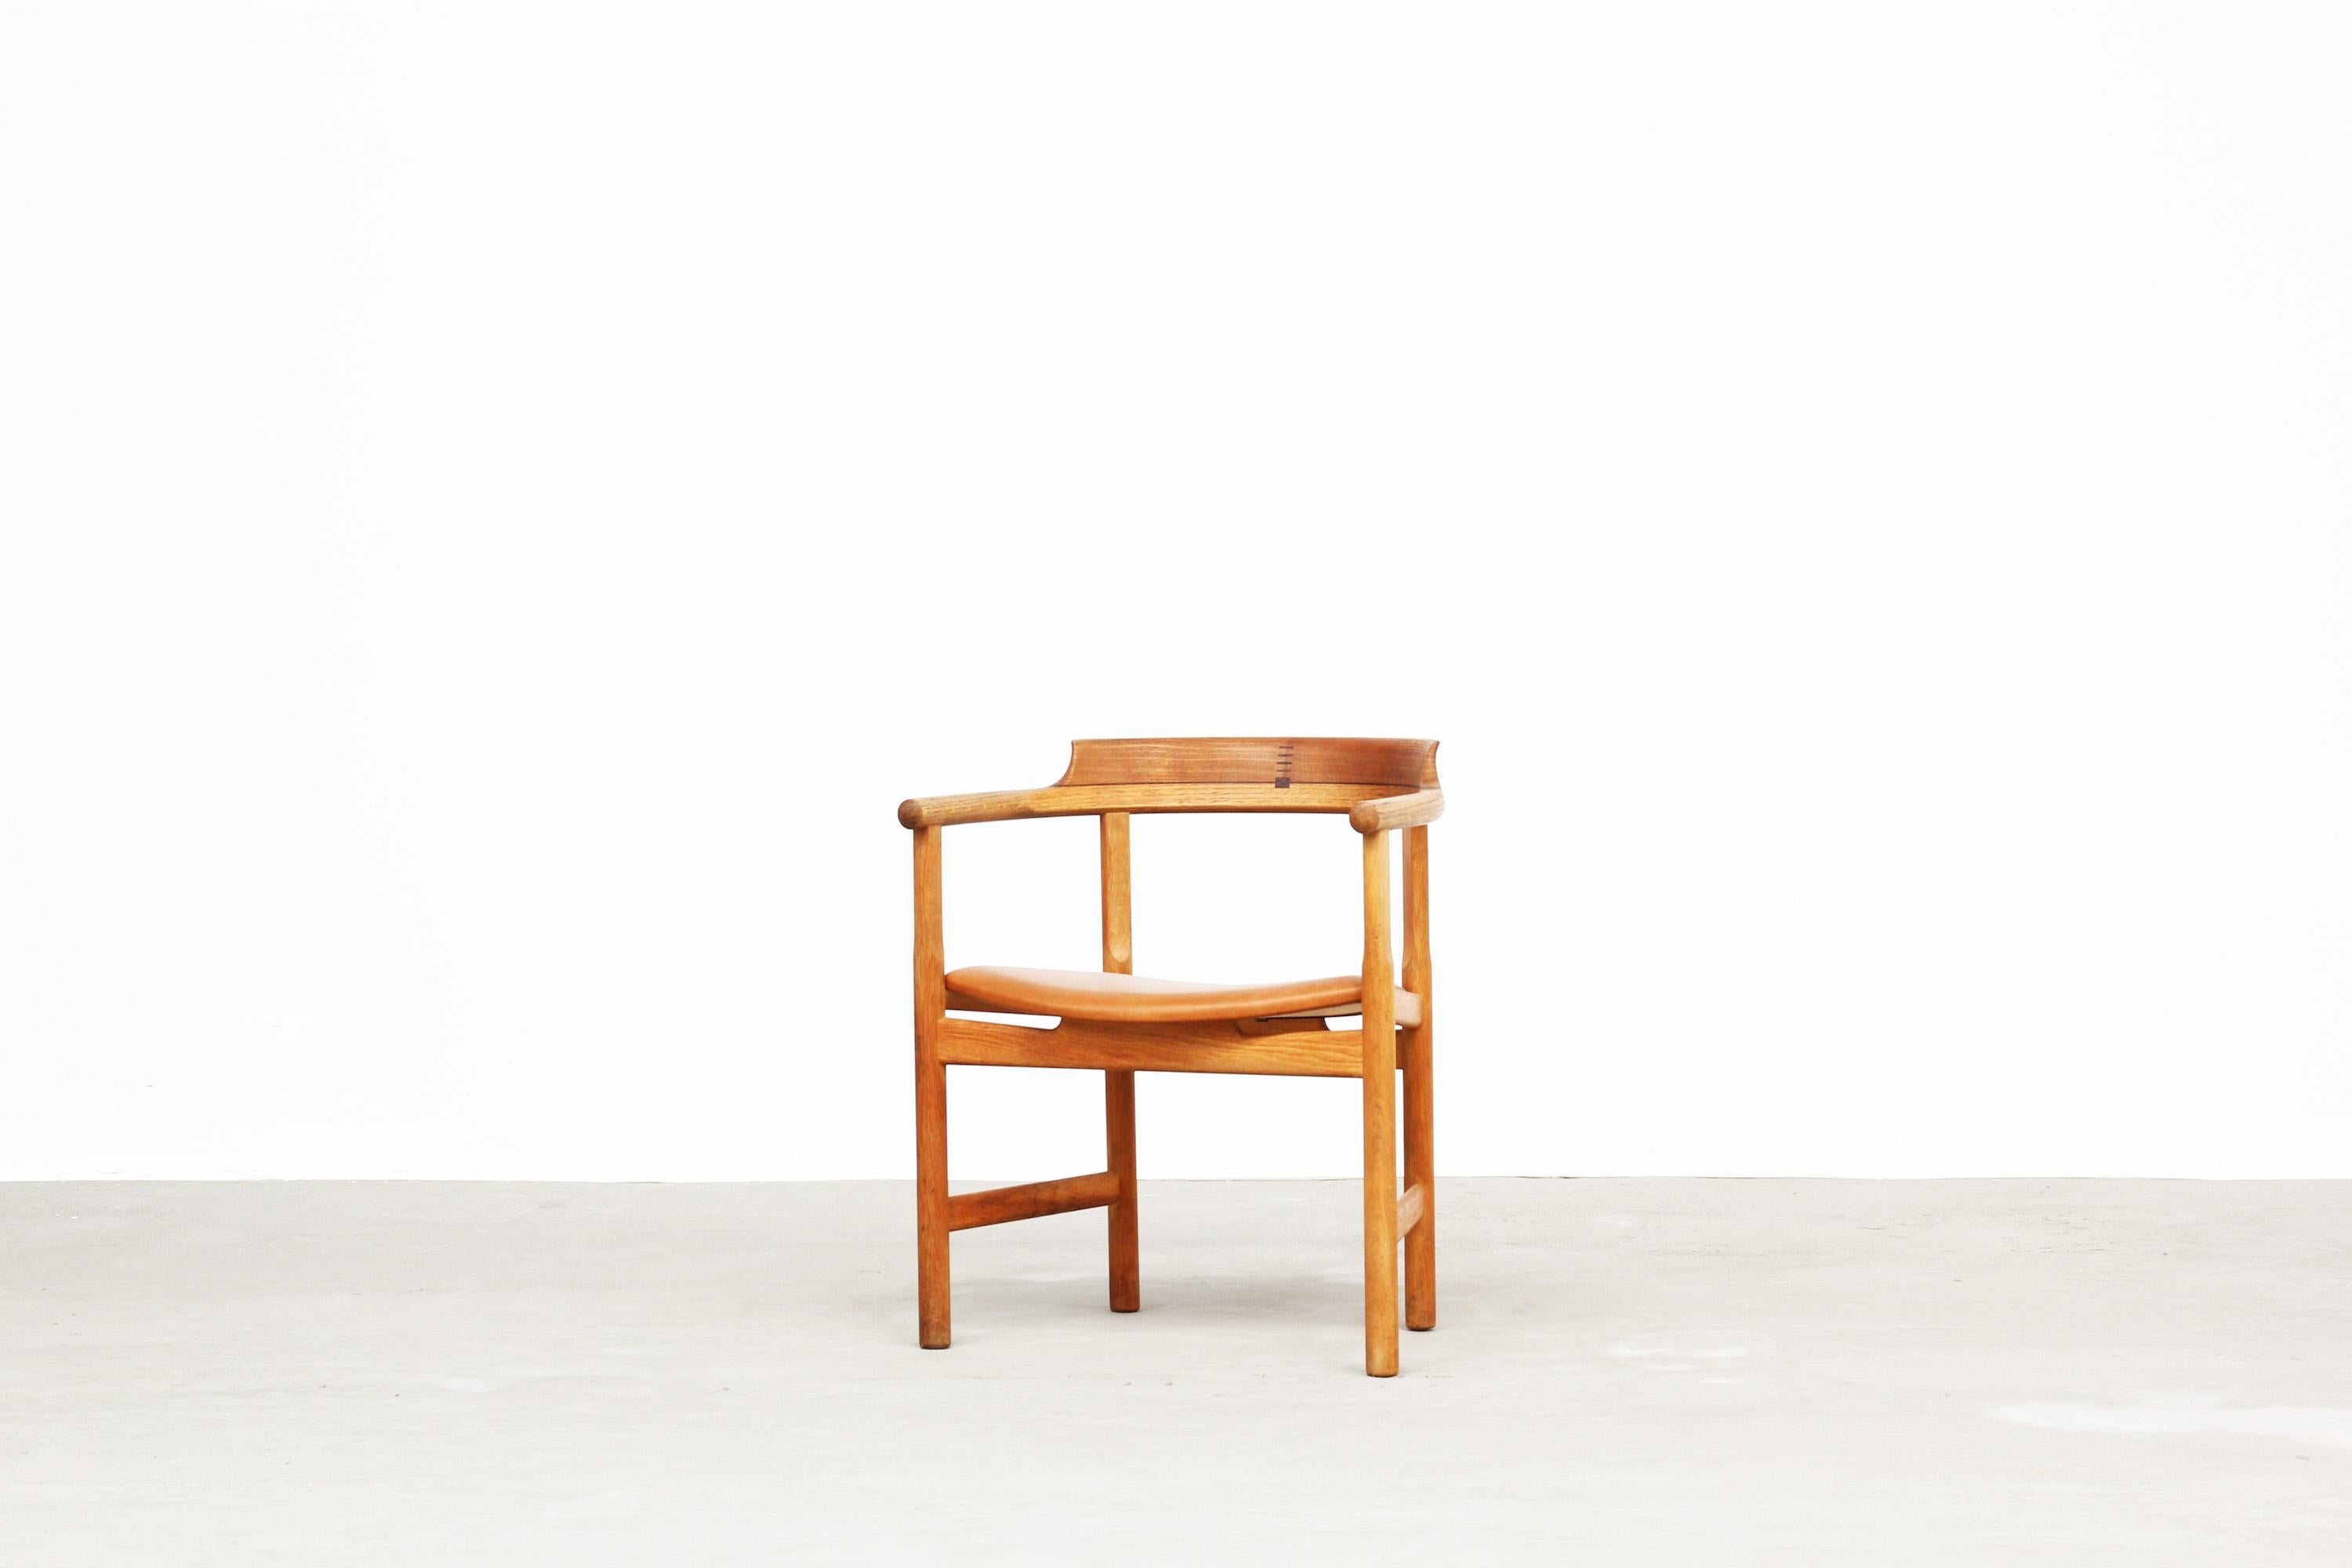 Beautiful armchair designed by Hans J. Wegner for PP Mobler, Denmark in 1975. The chair is in a very good condition without any repairs or damages. The frame is made of classical oak and the seat is newly reupholstered with brown-cognac leather.